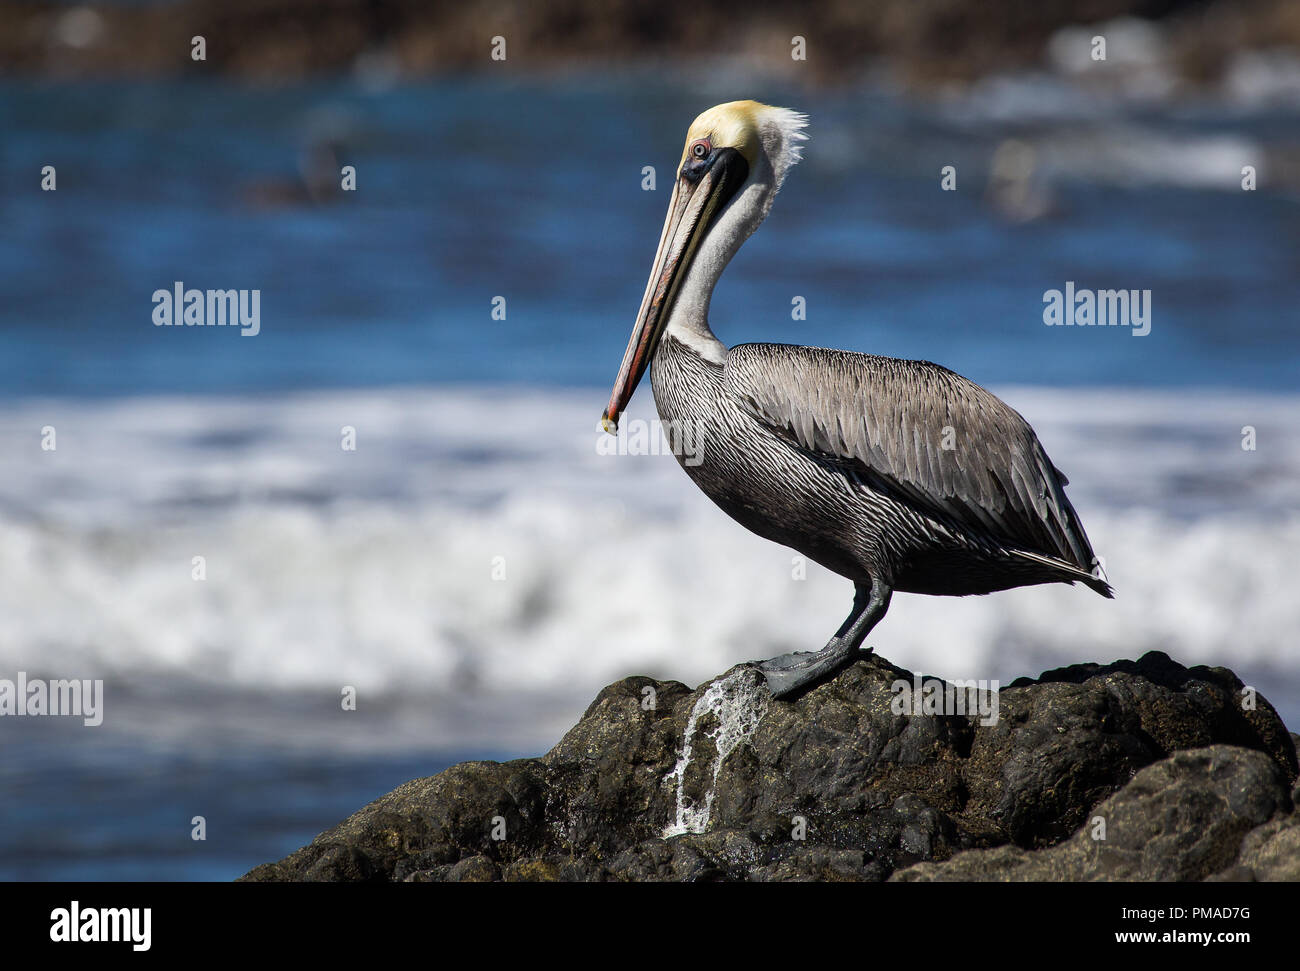 A brown pelican photographed in Playa Hermosa, Costa Rica Stock Photo